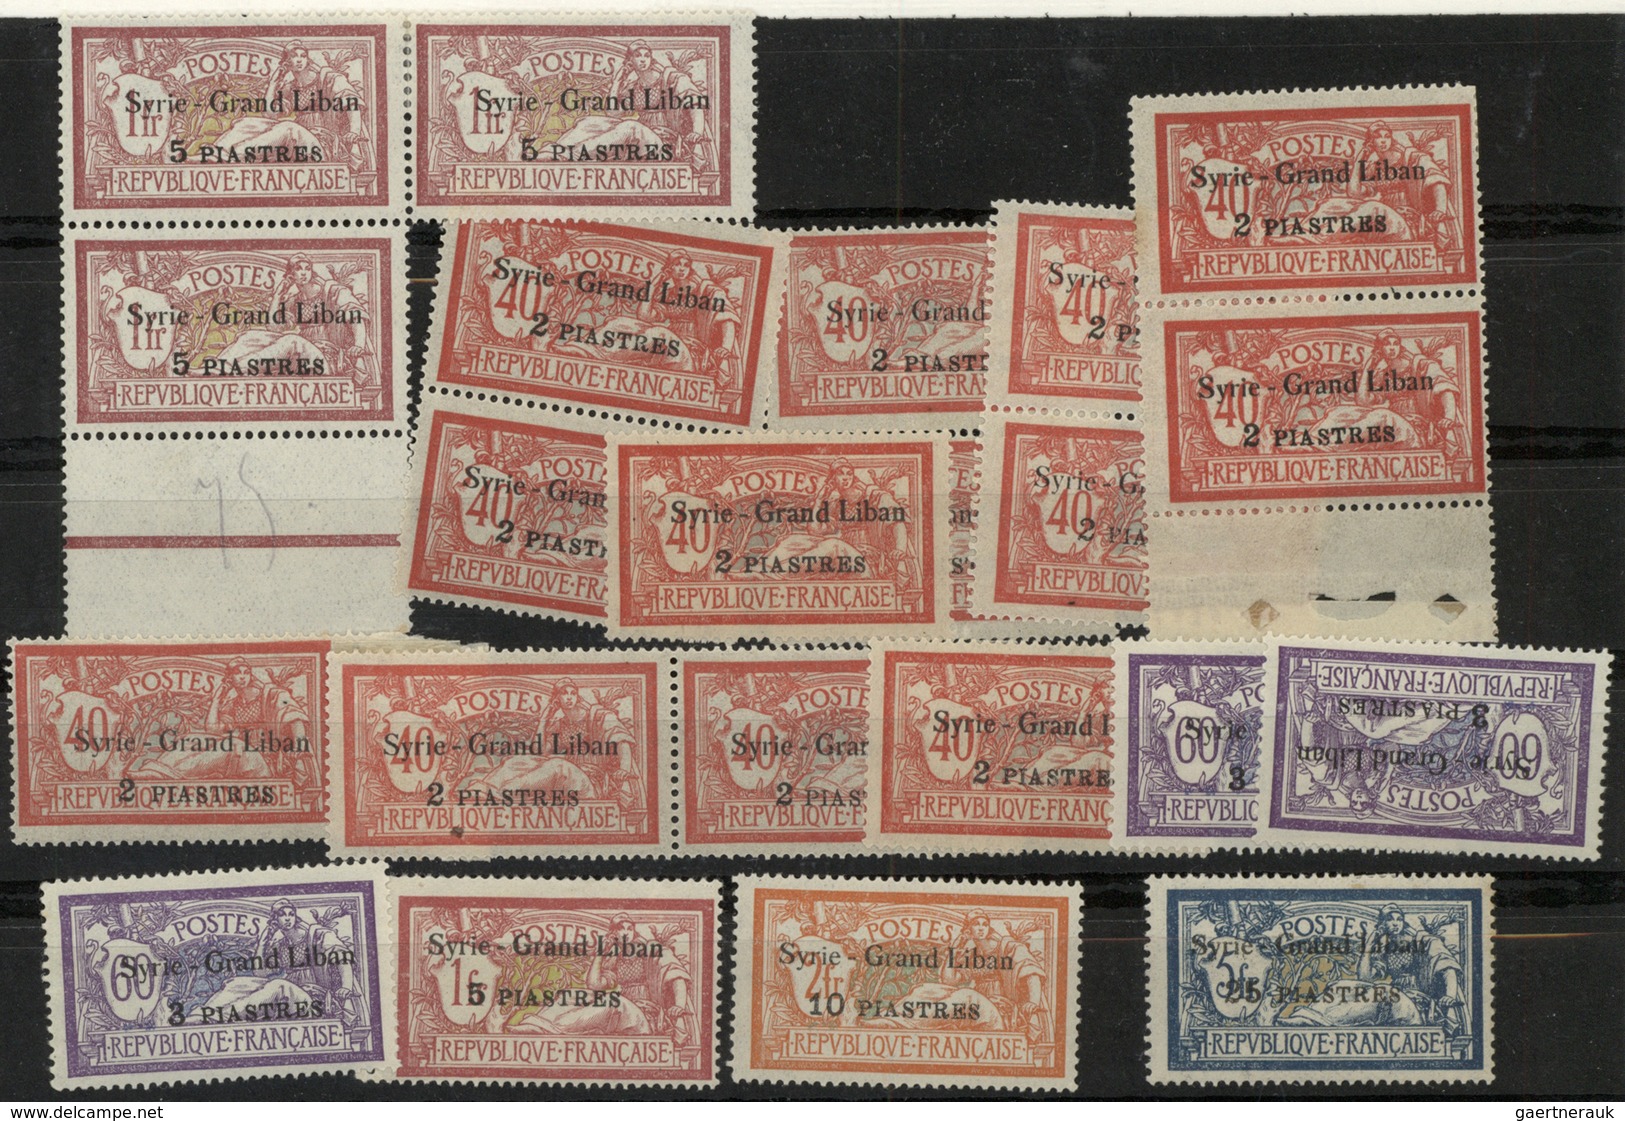 24171 Syrien: 1919/1924, comprehensive mint and used accumulation of the different overprint issues, allto